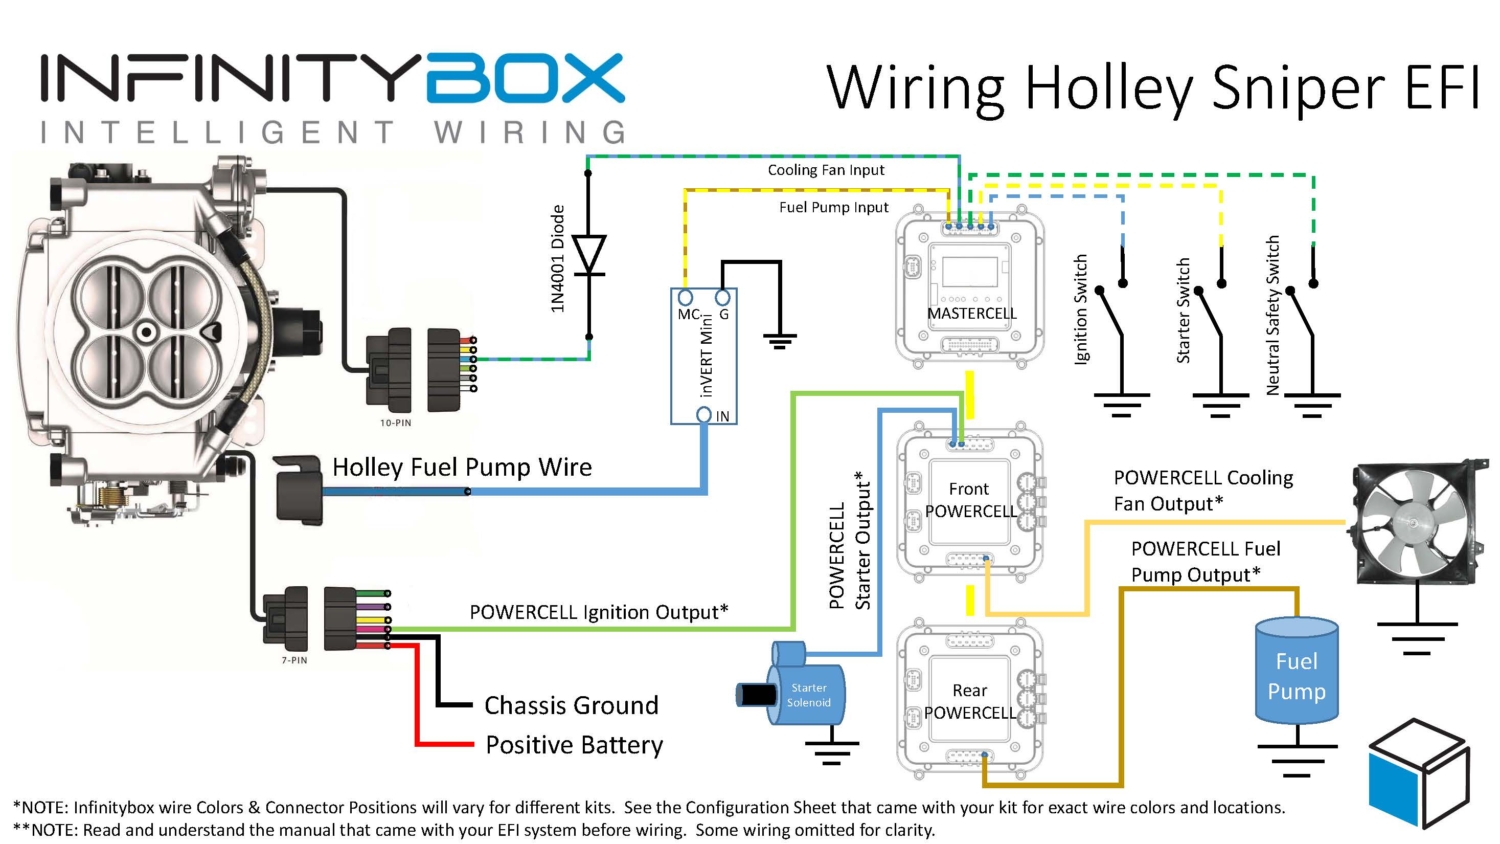 Wiring the Holley Sniper EFI - Infinitybox